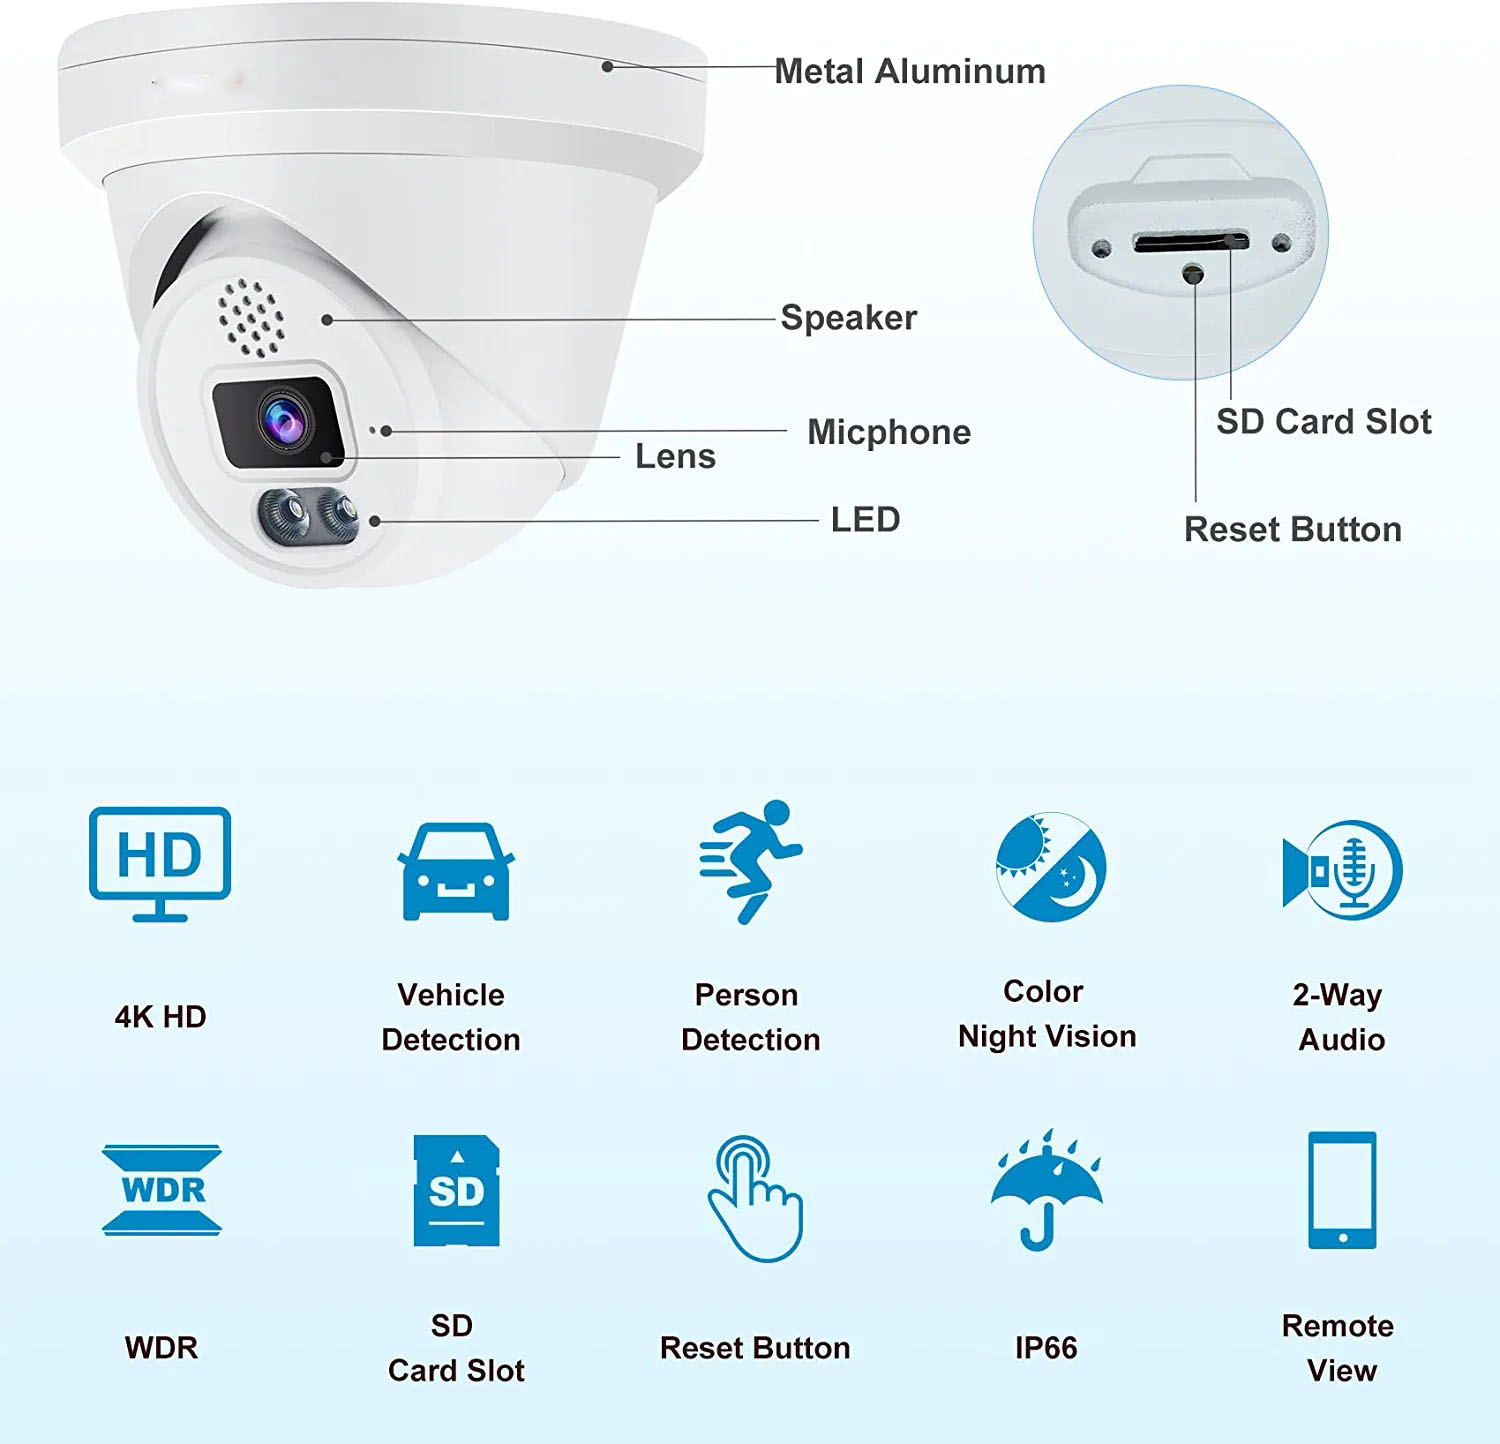 Microseven 4K/8MP Full Color Night Vision PoE Indoor / Outdoor IP Camera, UltraHD 8MP PoE IP Turret Security Camera with Human/Vehicle Detection, Two-Way Audio Wide Angle, WDR, DNR, 256GB SD Slot, Waterproof, ONVIF CCTV Surveillance Camera, Web GUI & Apps, VMS (Video Management System) Cloud Storage+ Broadcasting on YouTube, Facebook & Microseven.tv